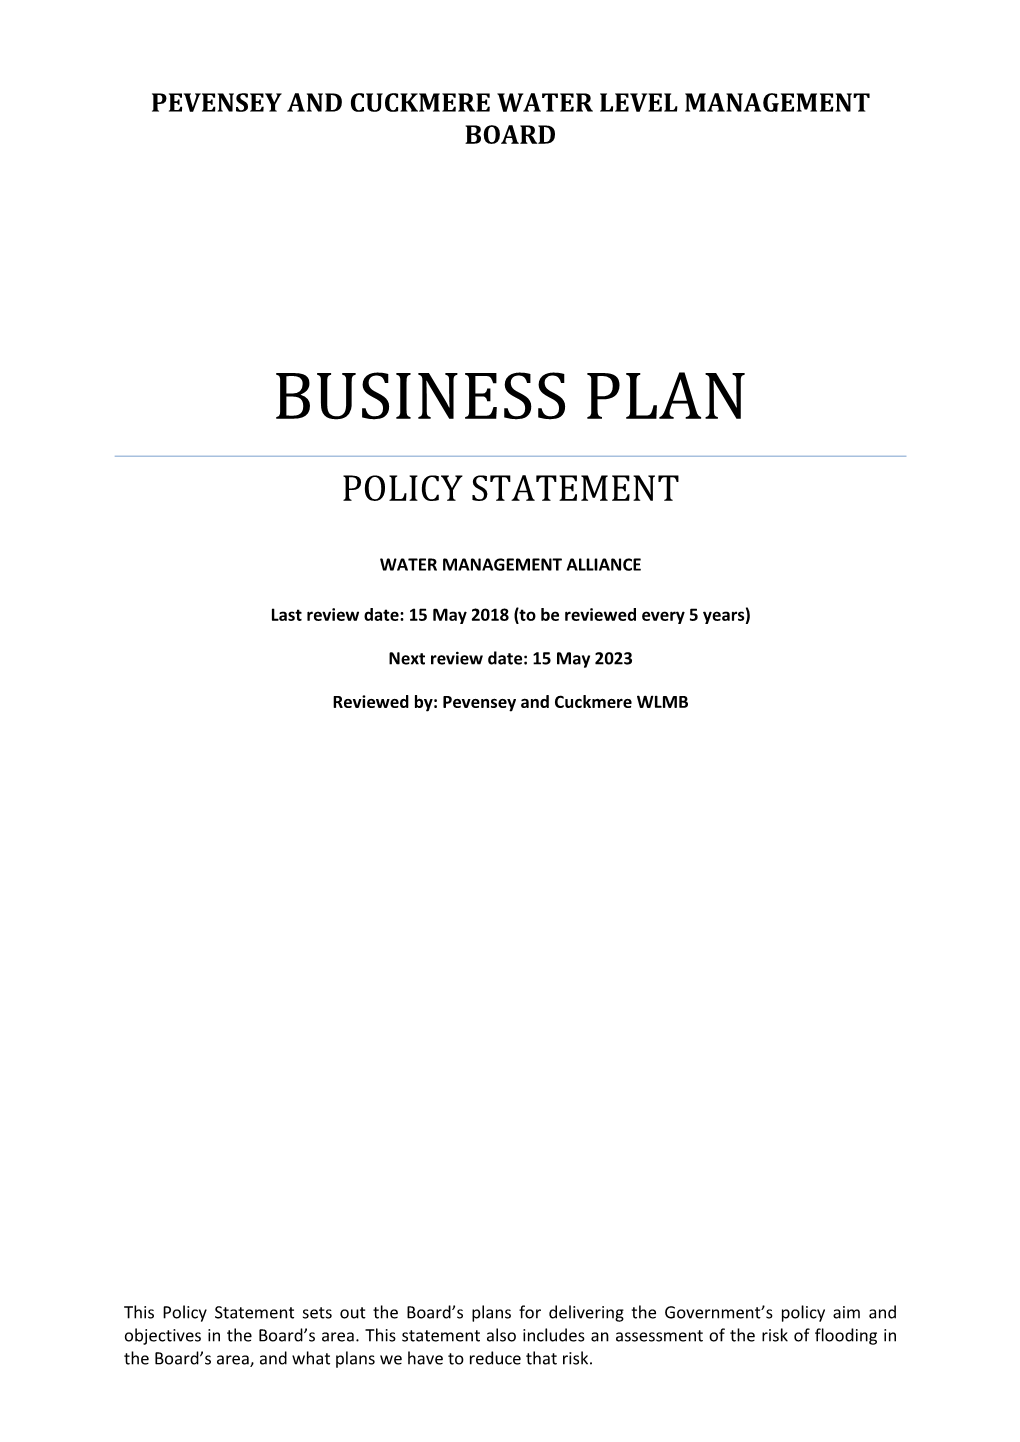 Business Plan and Policy Statement